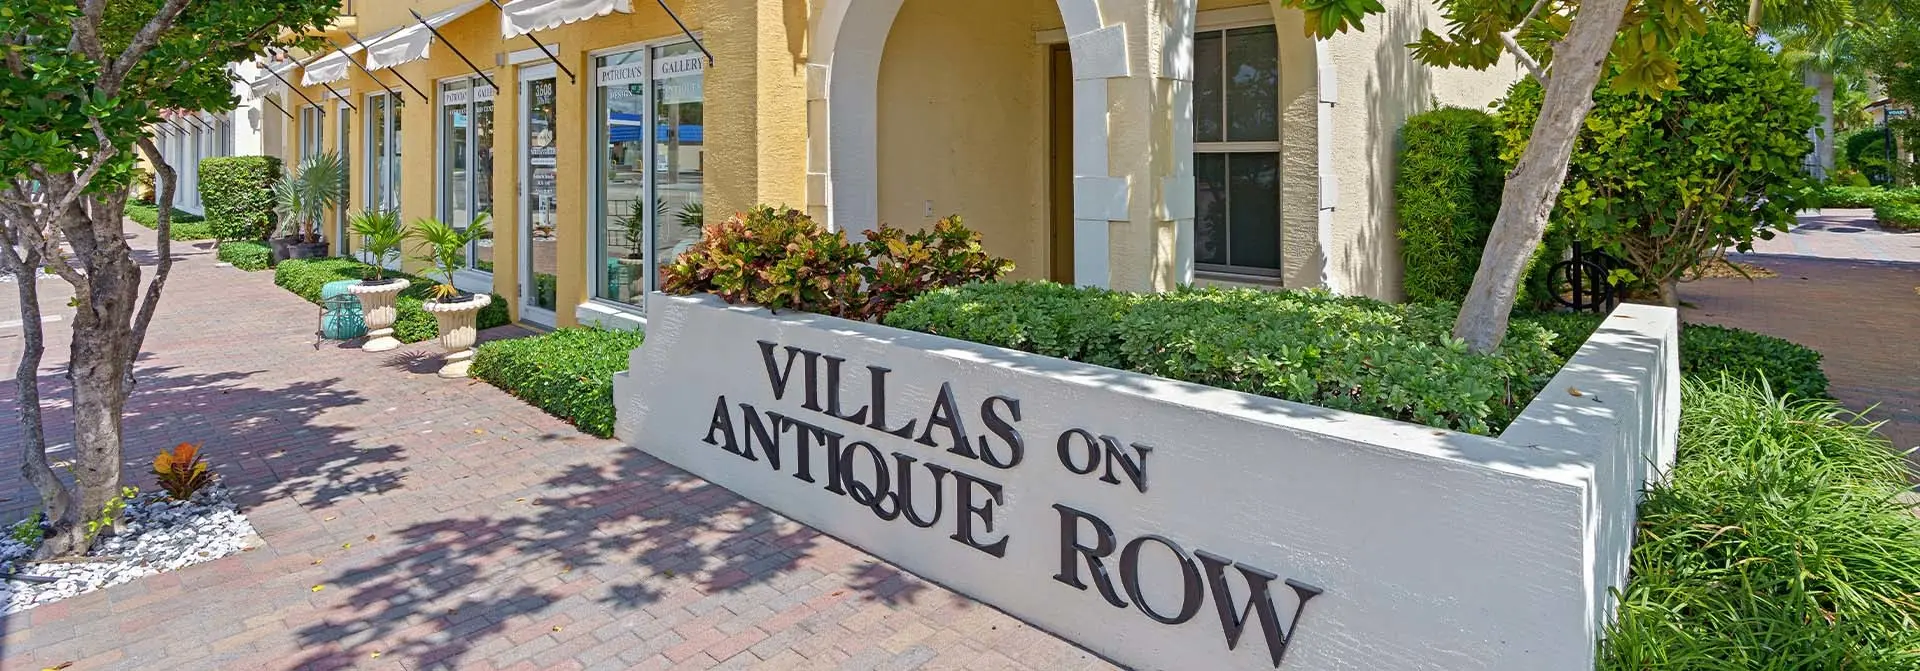 Villas on Antique Row for Sale | Homes for Sale at Villas on Antique Row